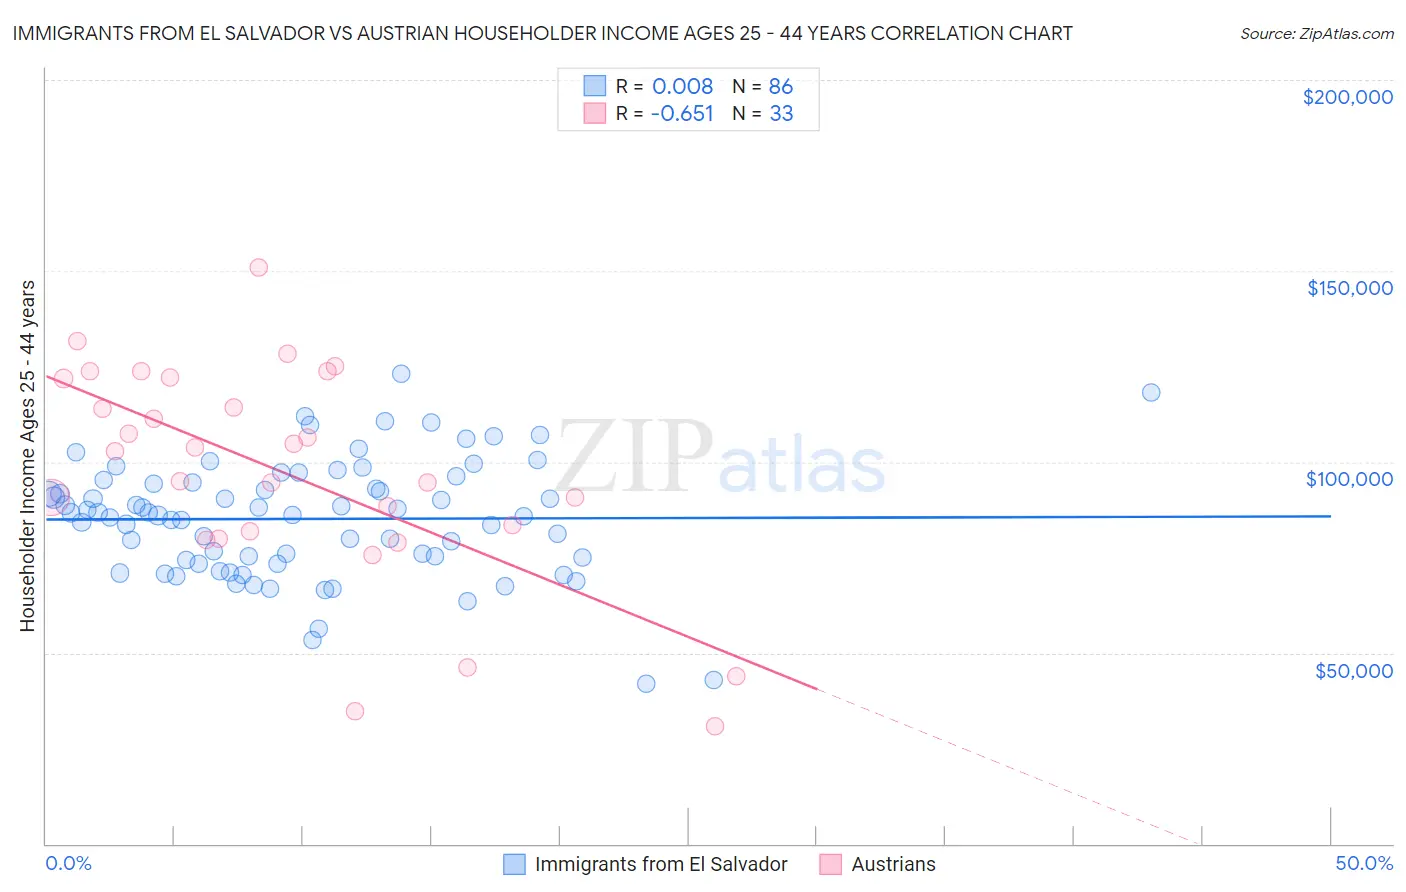 Immigrants from El Salvador vs Austrian Householder Income Ages 25 - 44 years